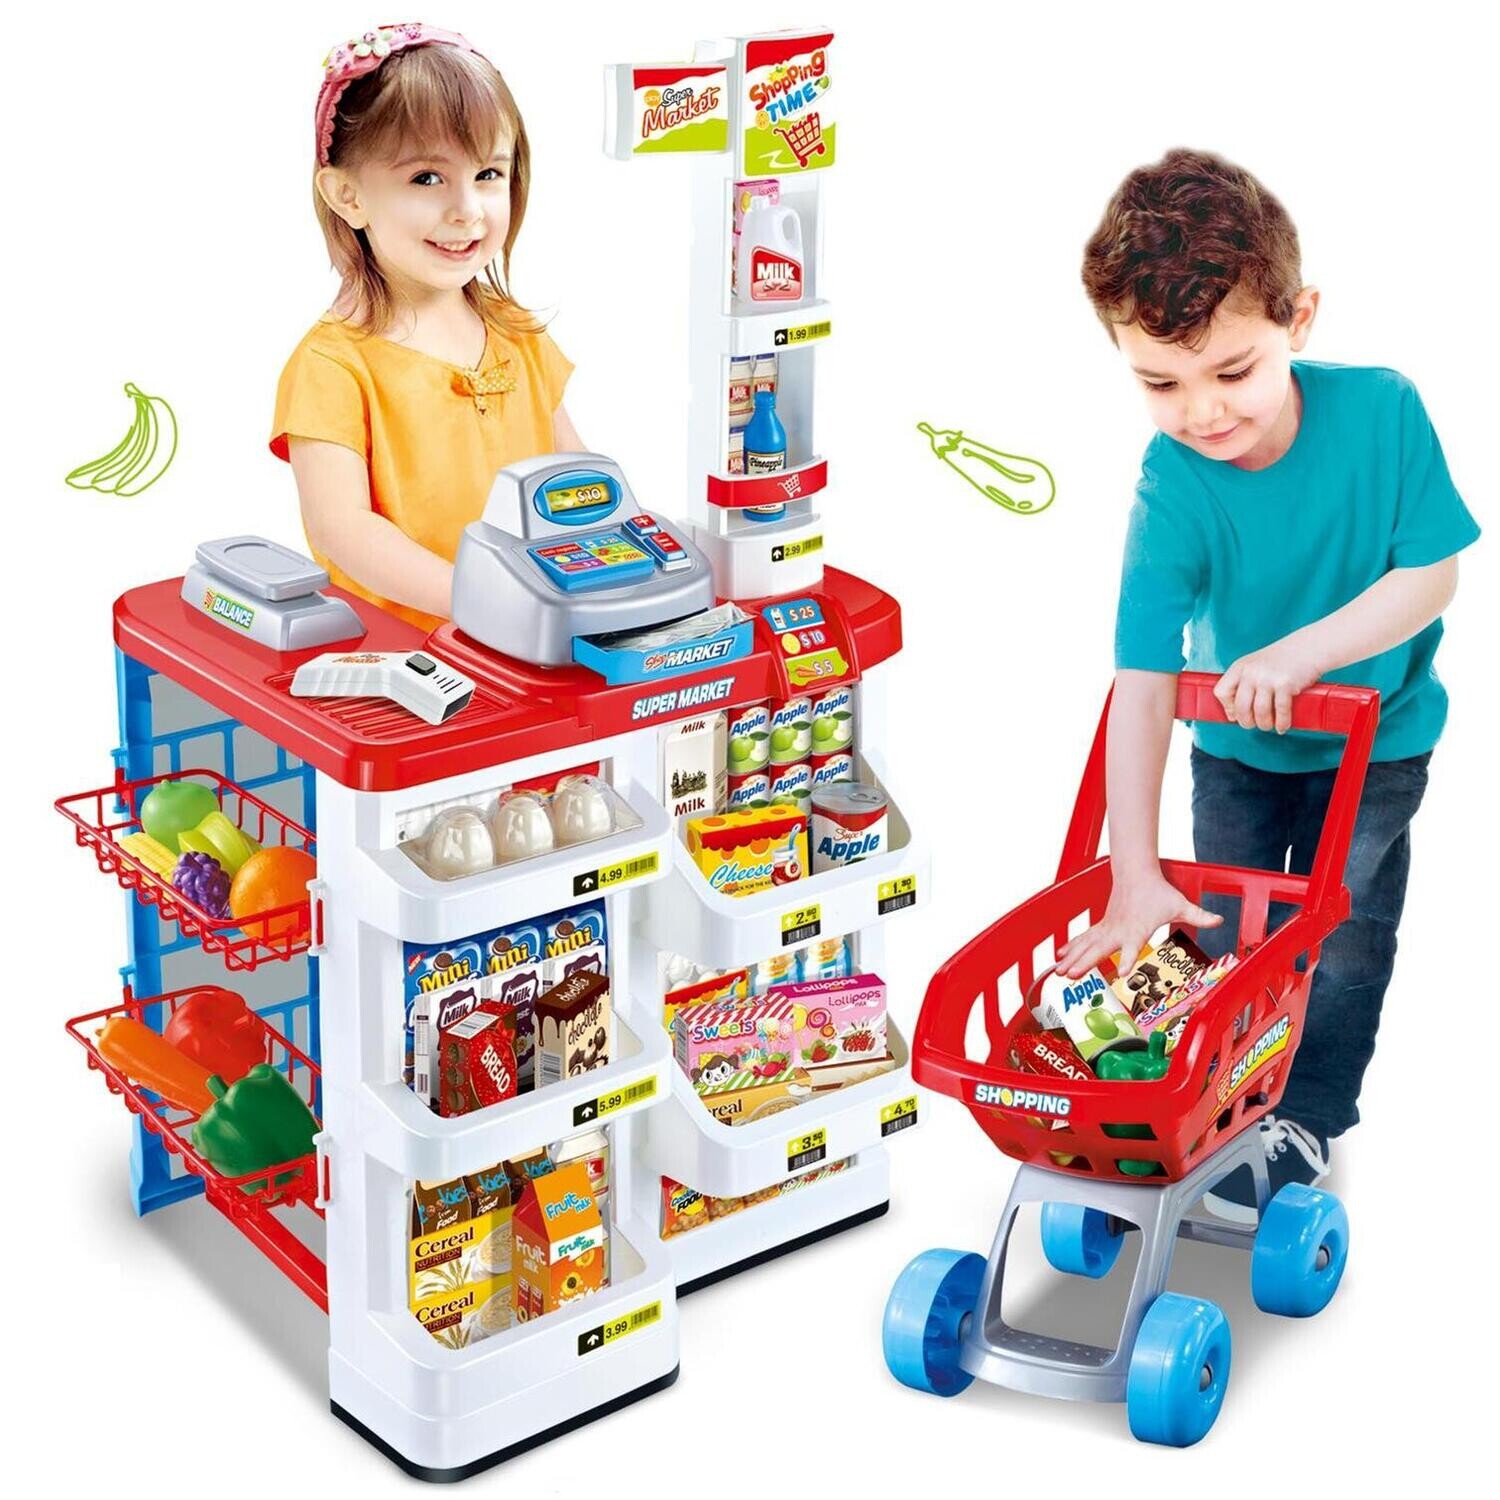 Shopping House Market Kids Toy Cash register - Portable Accessories For Toddler